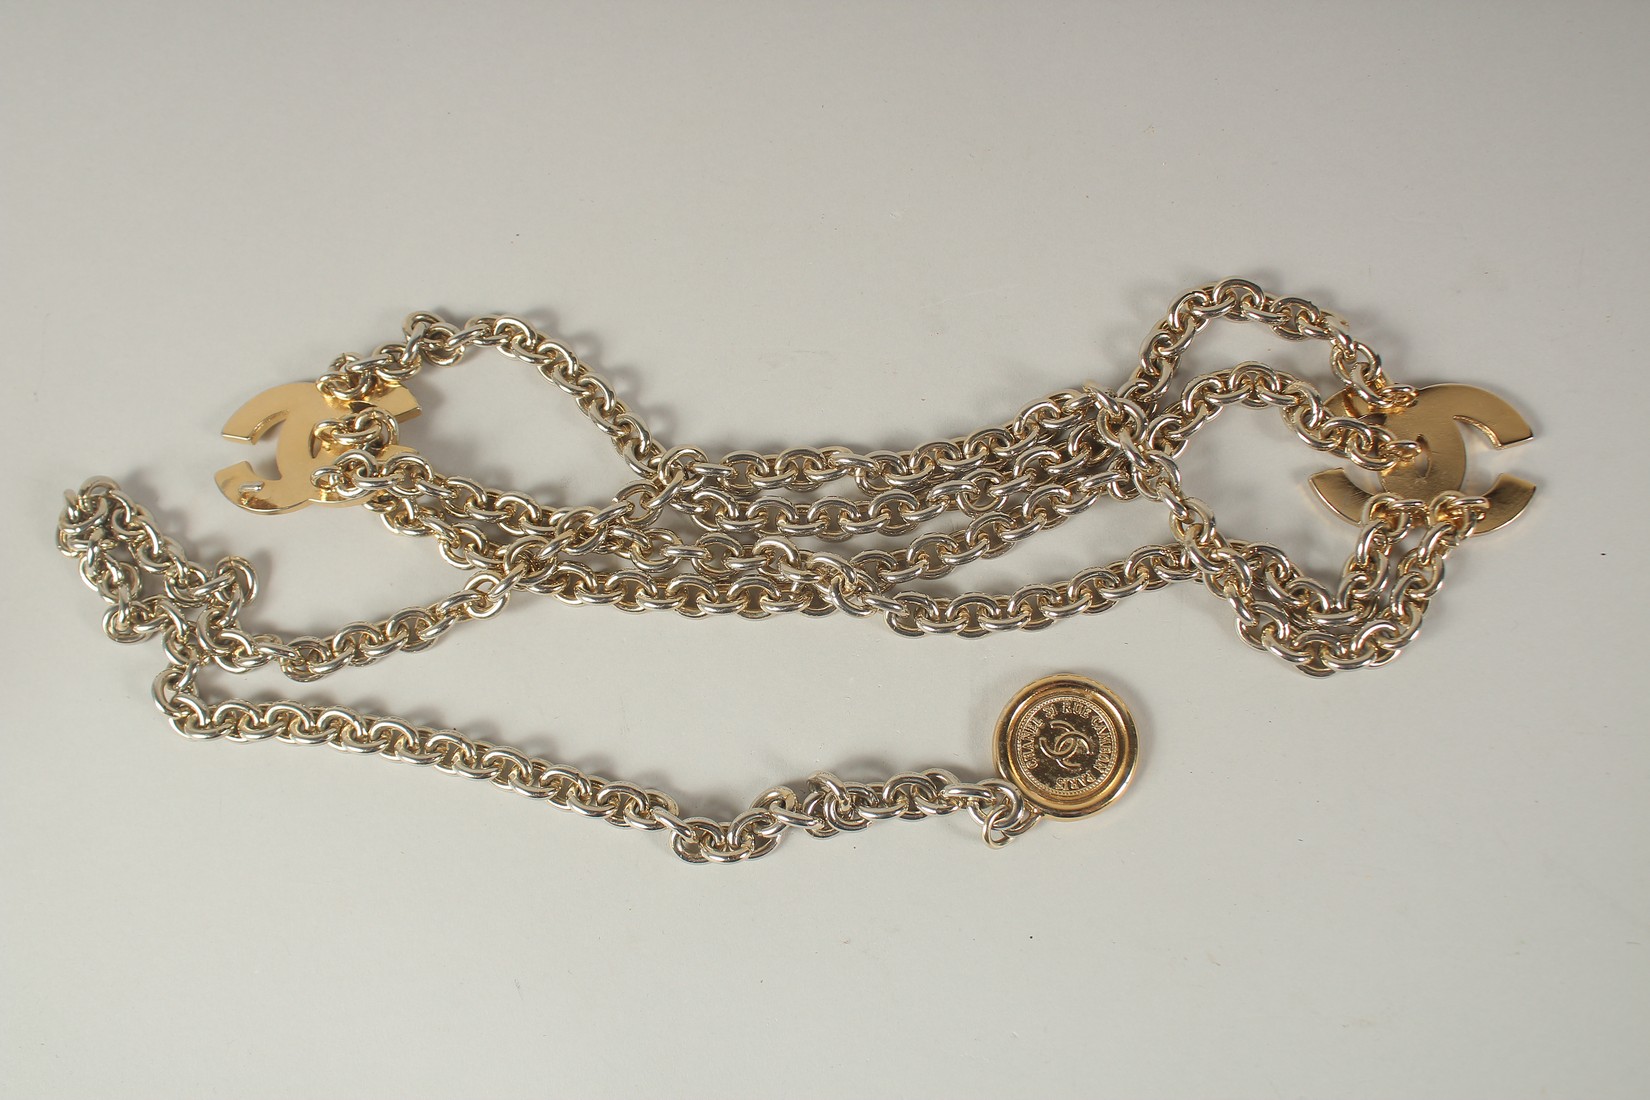 A LONG CHANEL GILT BELT with pendant and tie, double C emblem. 110cms long. - Image 5 of 9